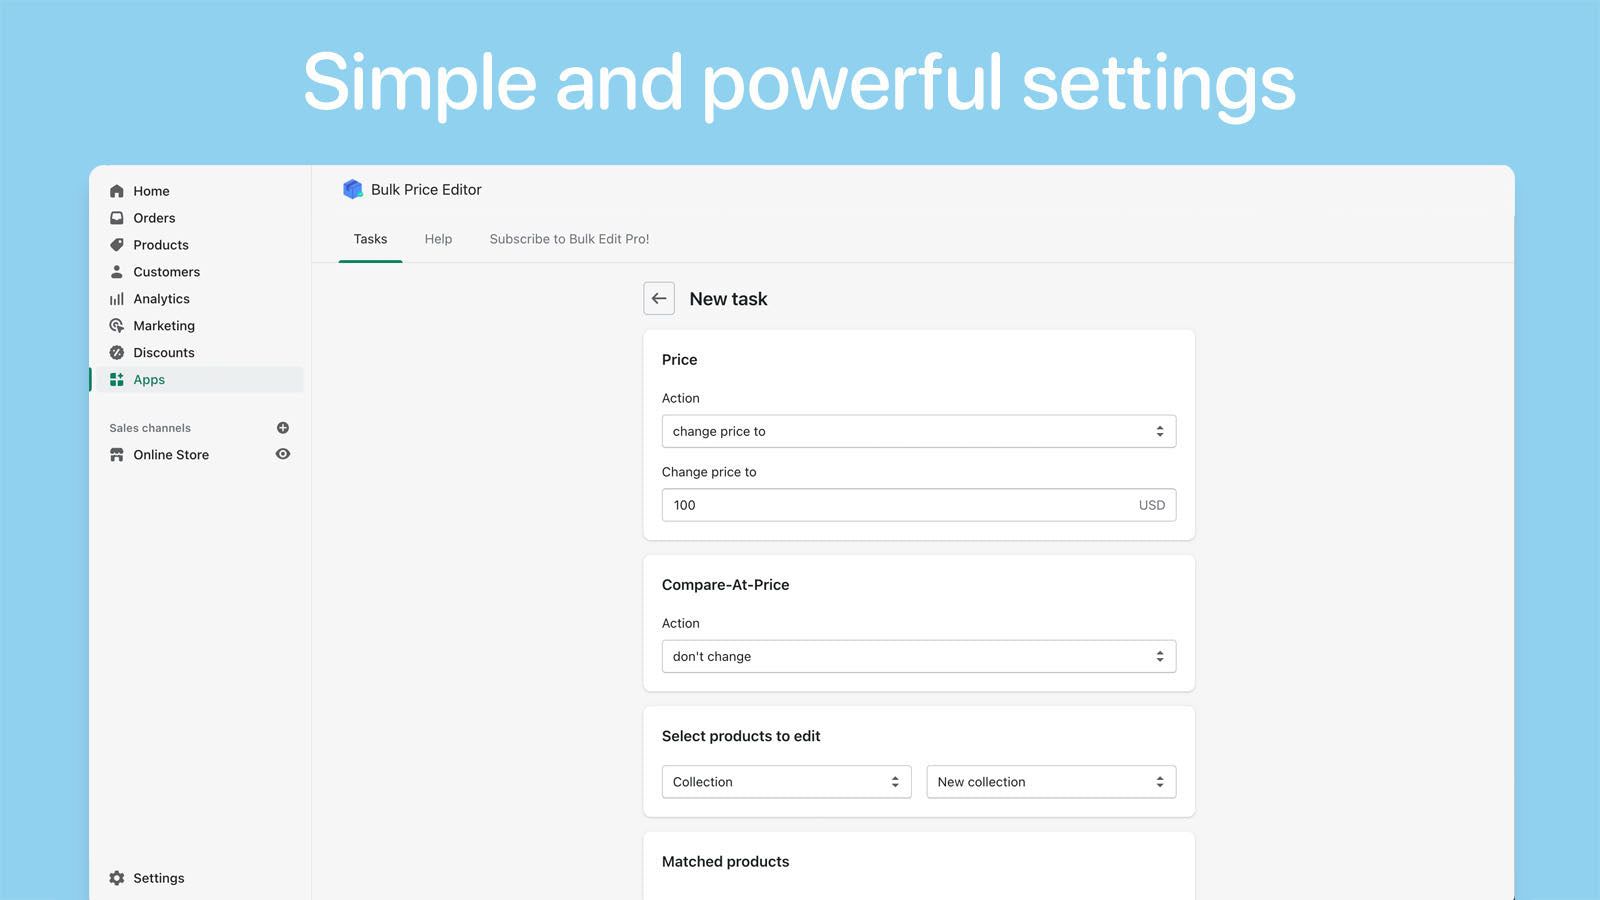 Simple and powerful settings for task